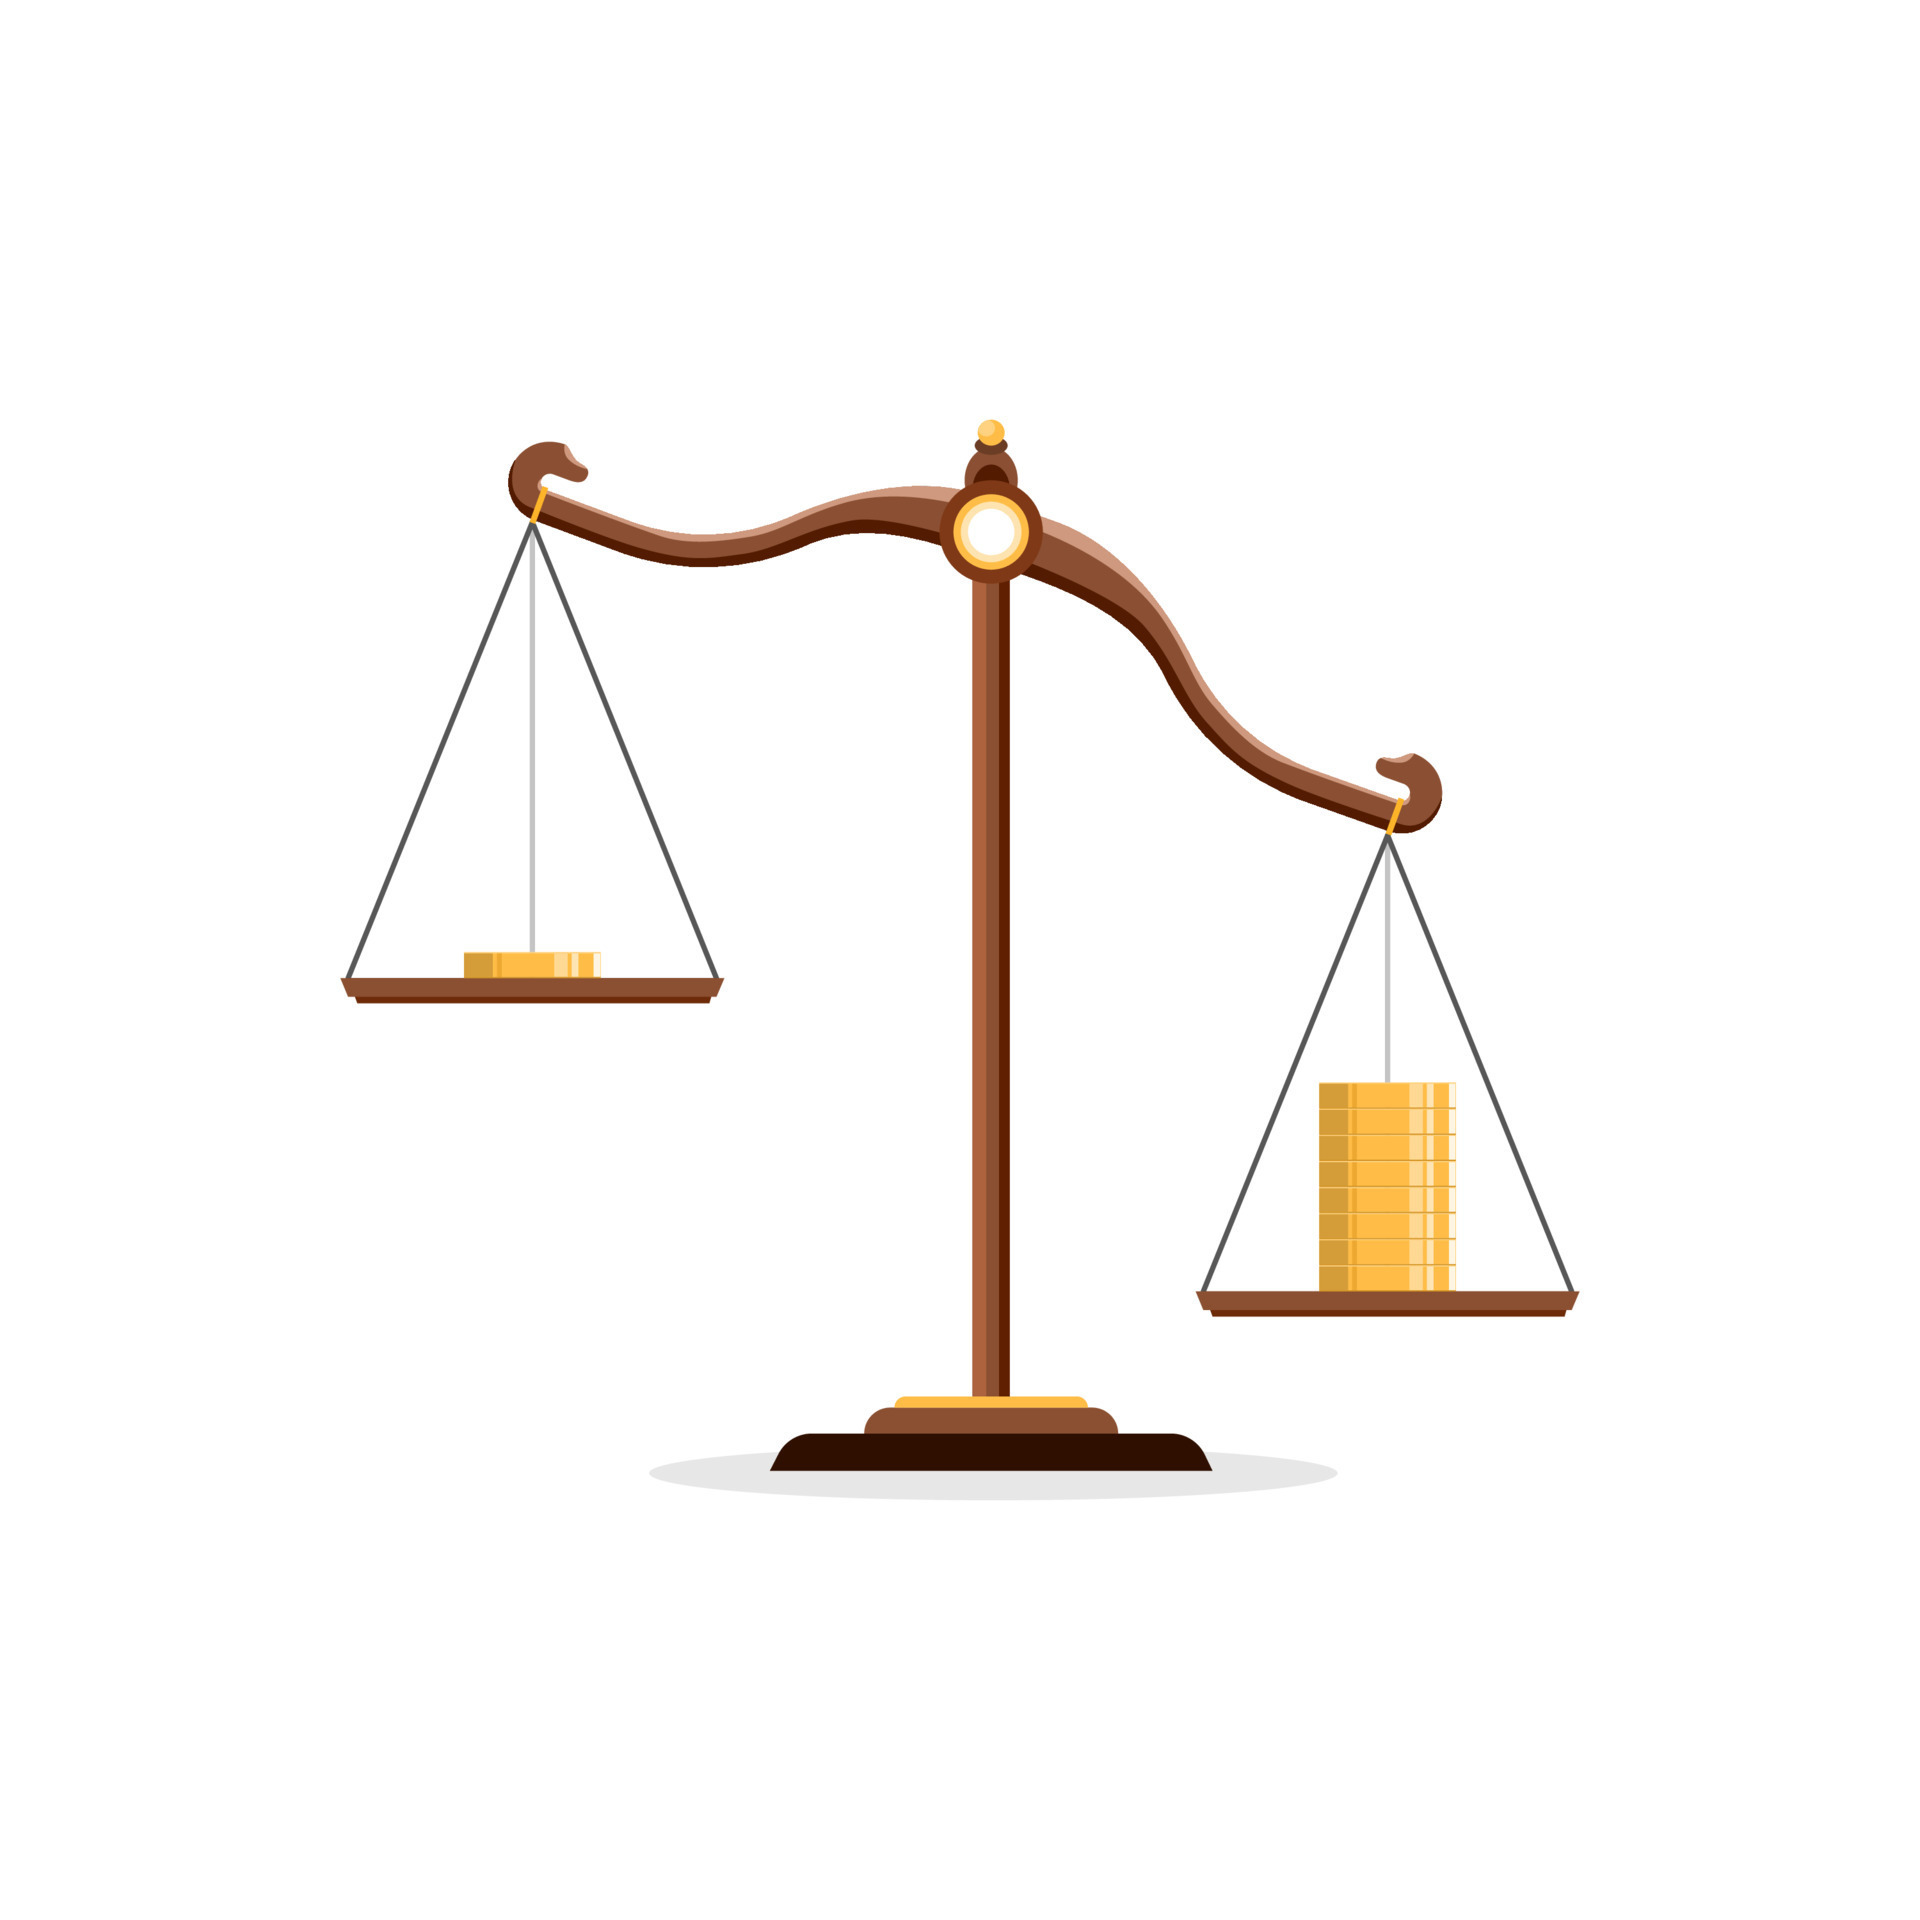 Scales Of Justice, Weight Balance #Ad , #Sponsored, #Justice#Scales#Balance# Weight